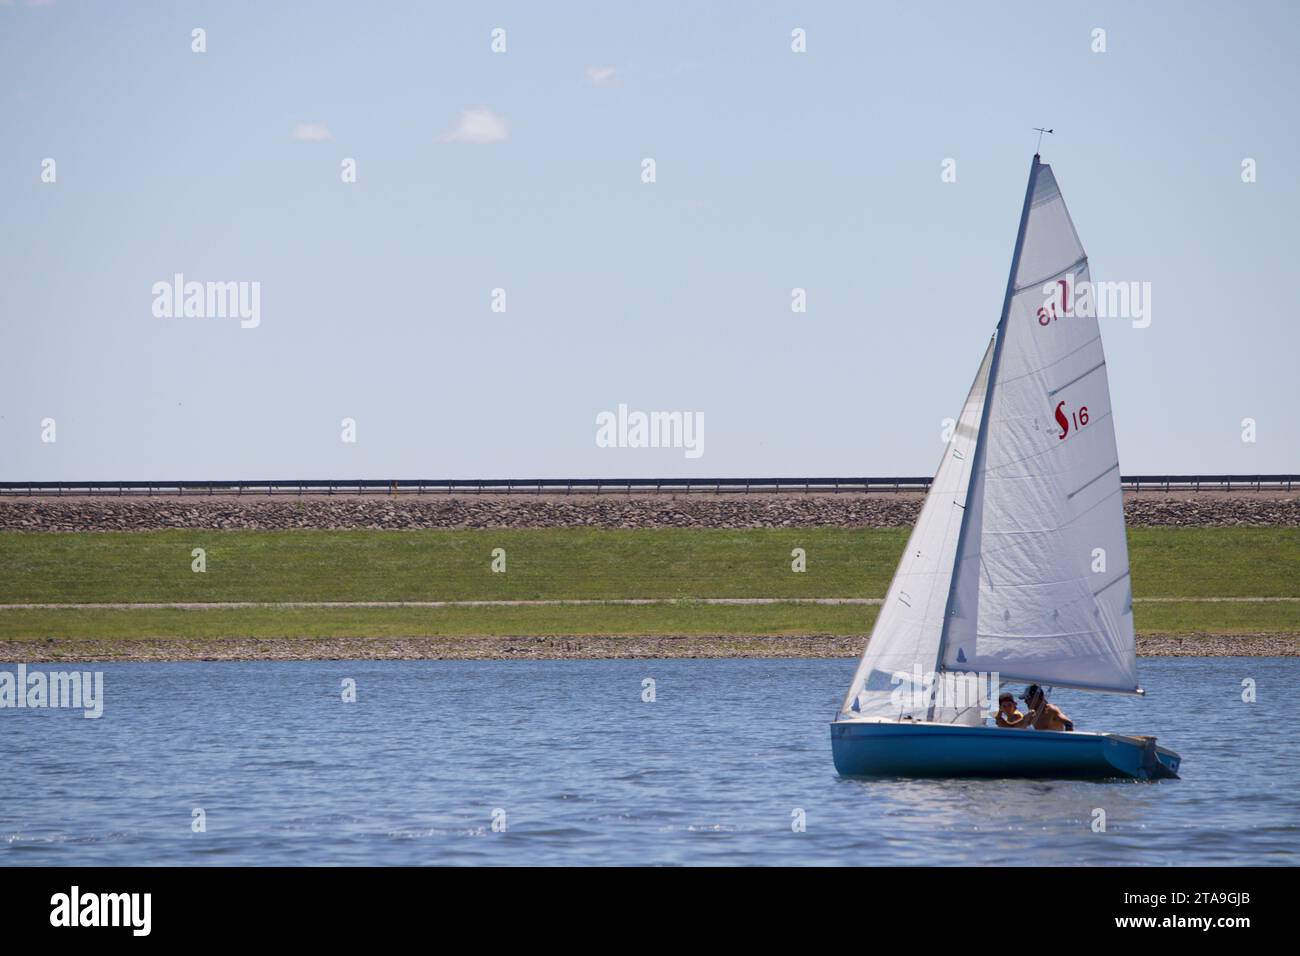 Learning to Sail - calm waters are perfect for introducing the joys and fine art of sailing. Perfect for education and training or just relaxing. Stock Photo